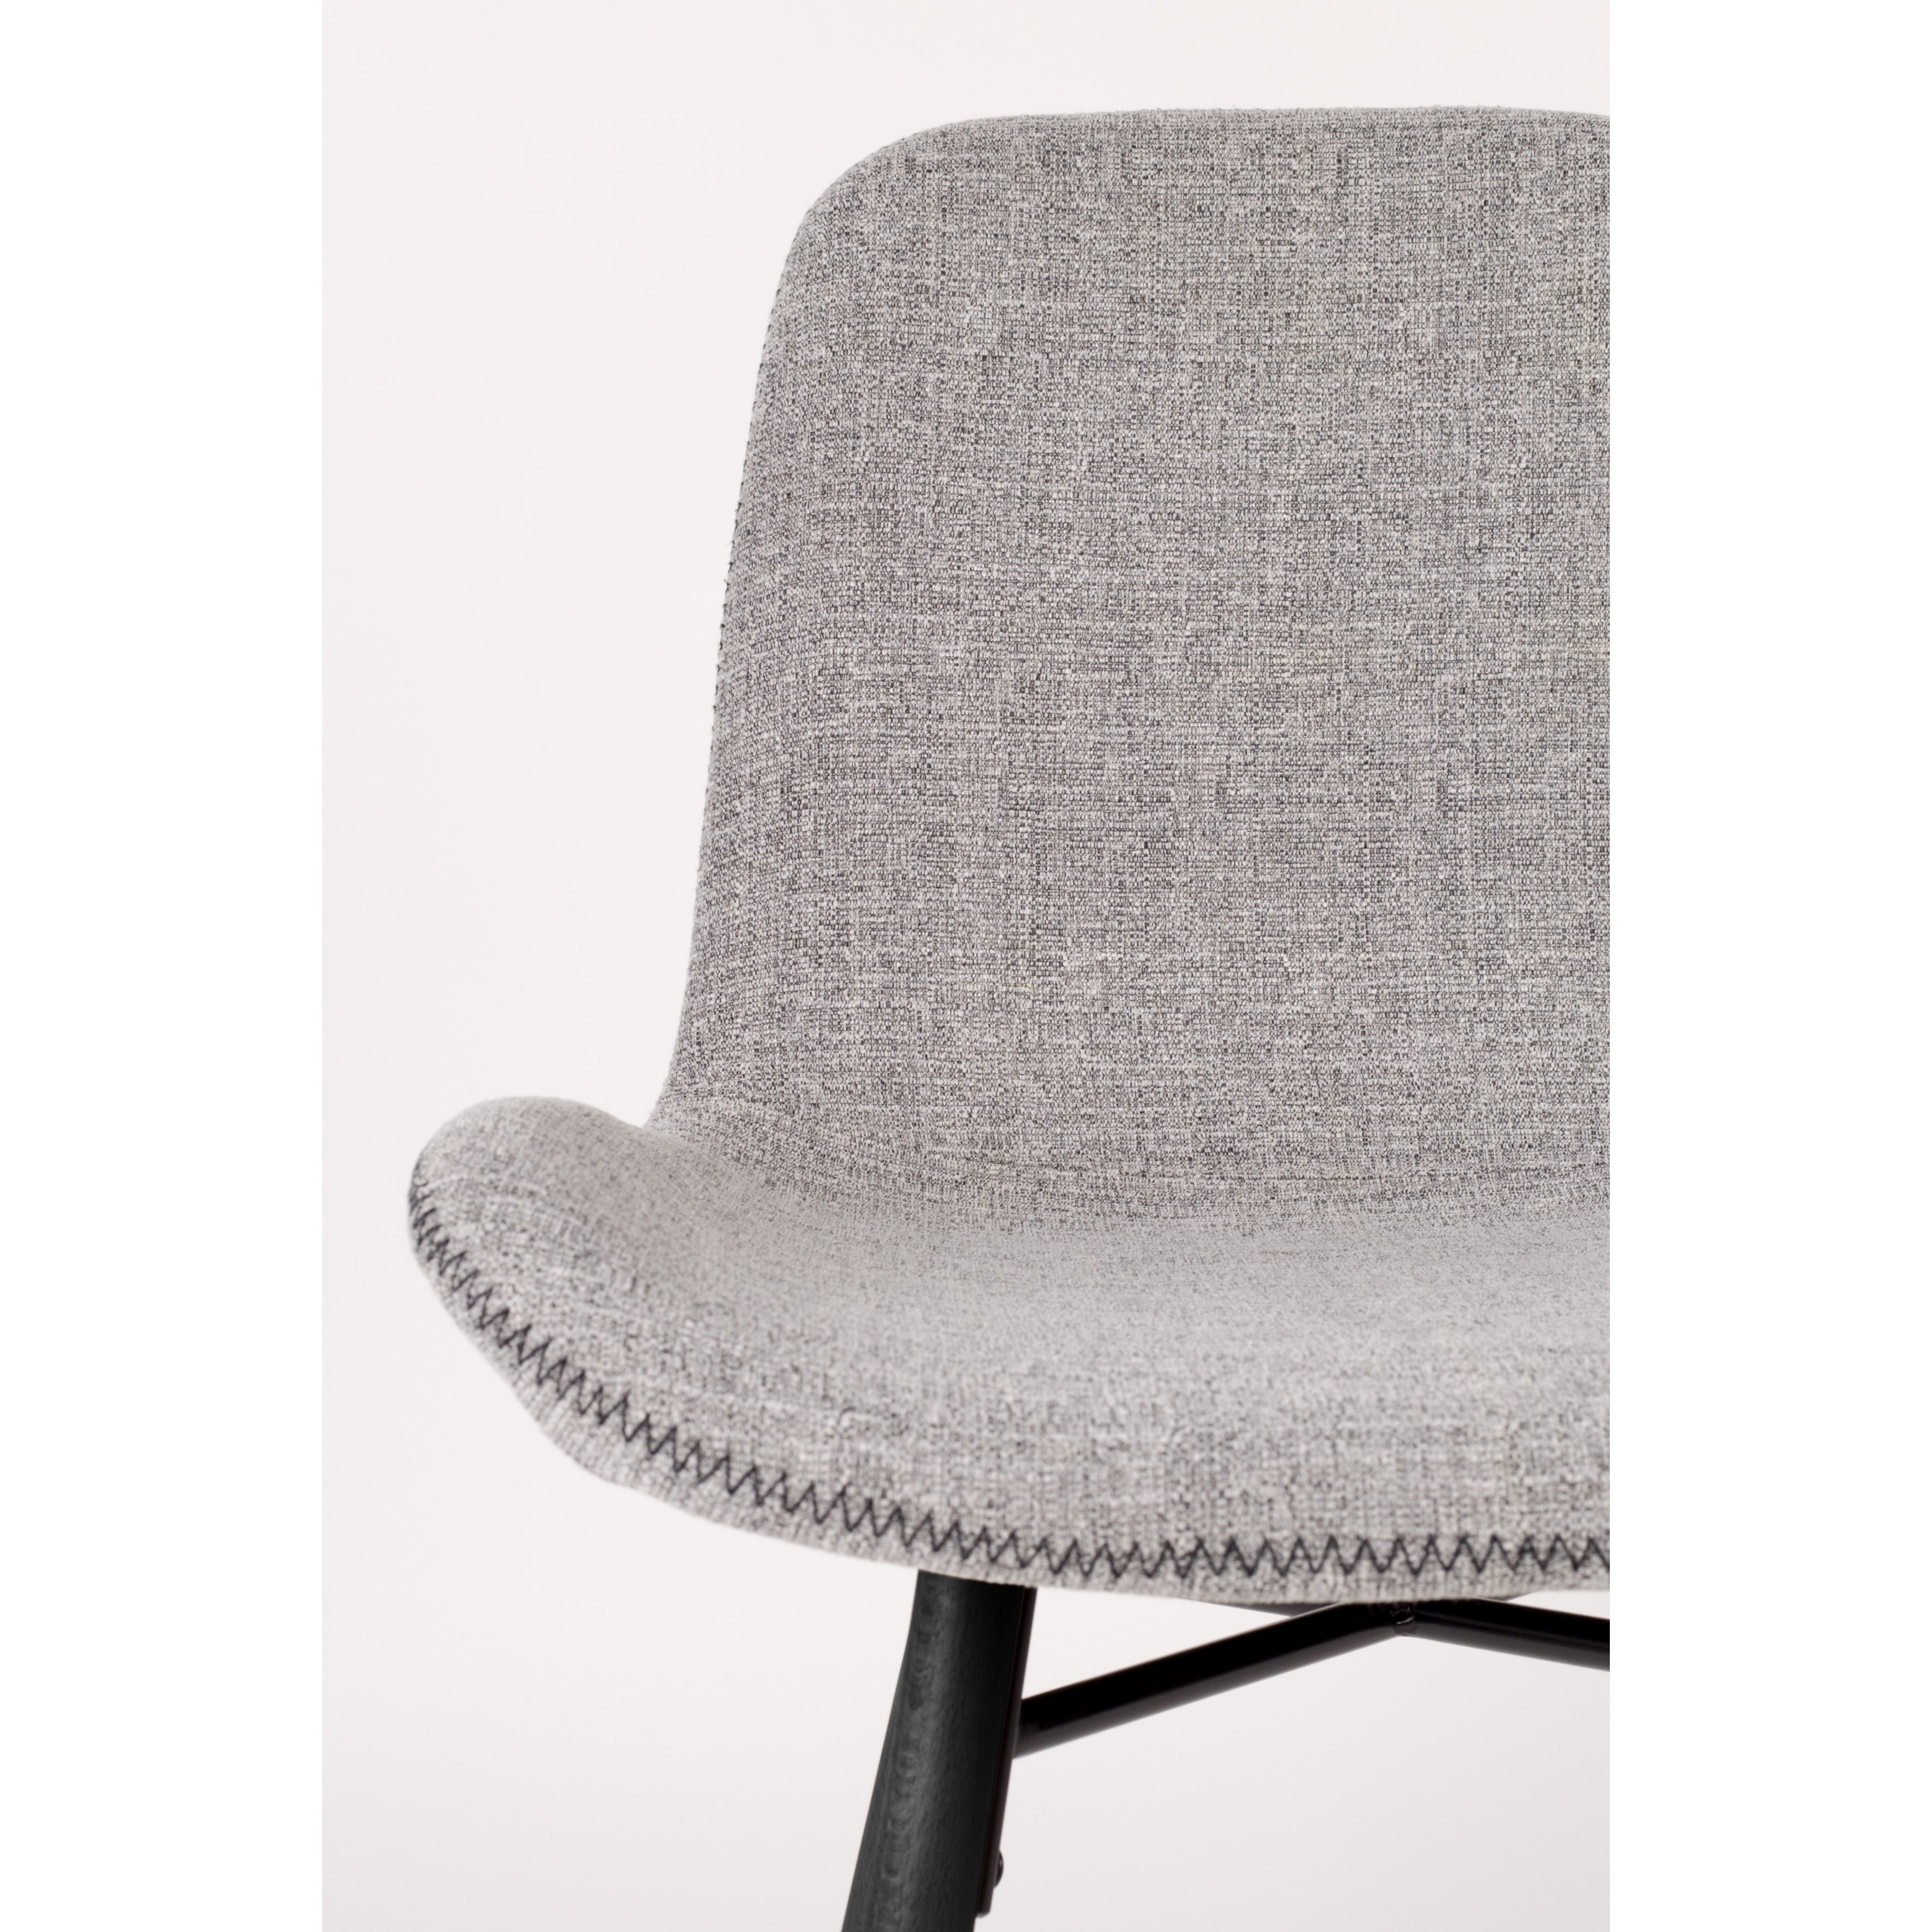 Chair lester light gray | 2 pieces